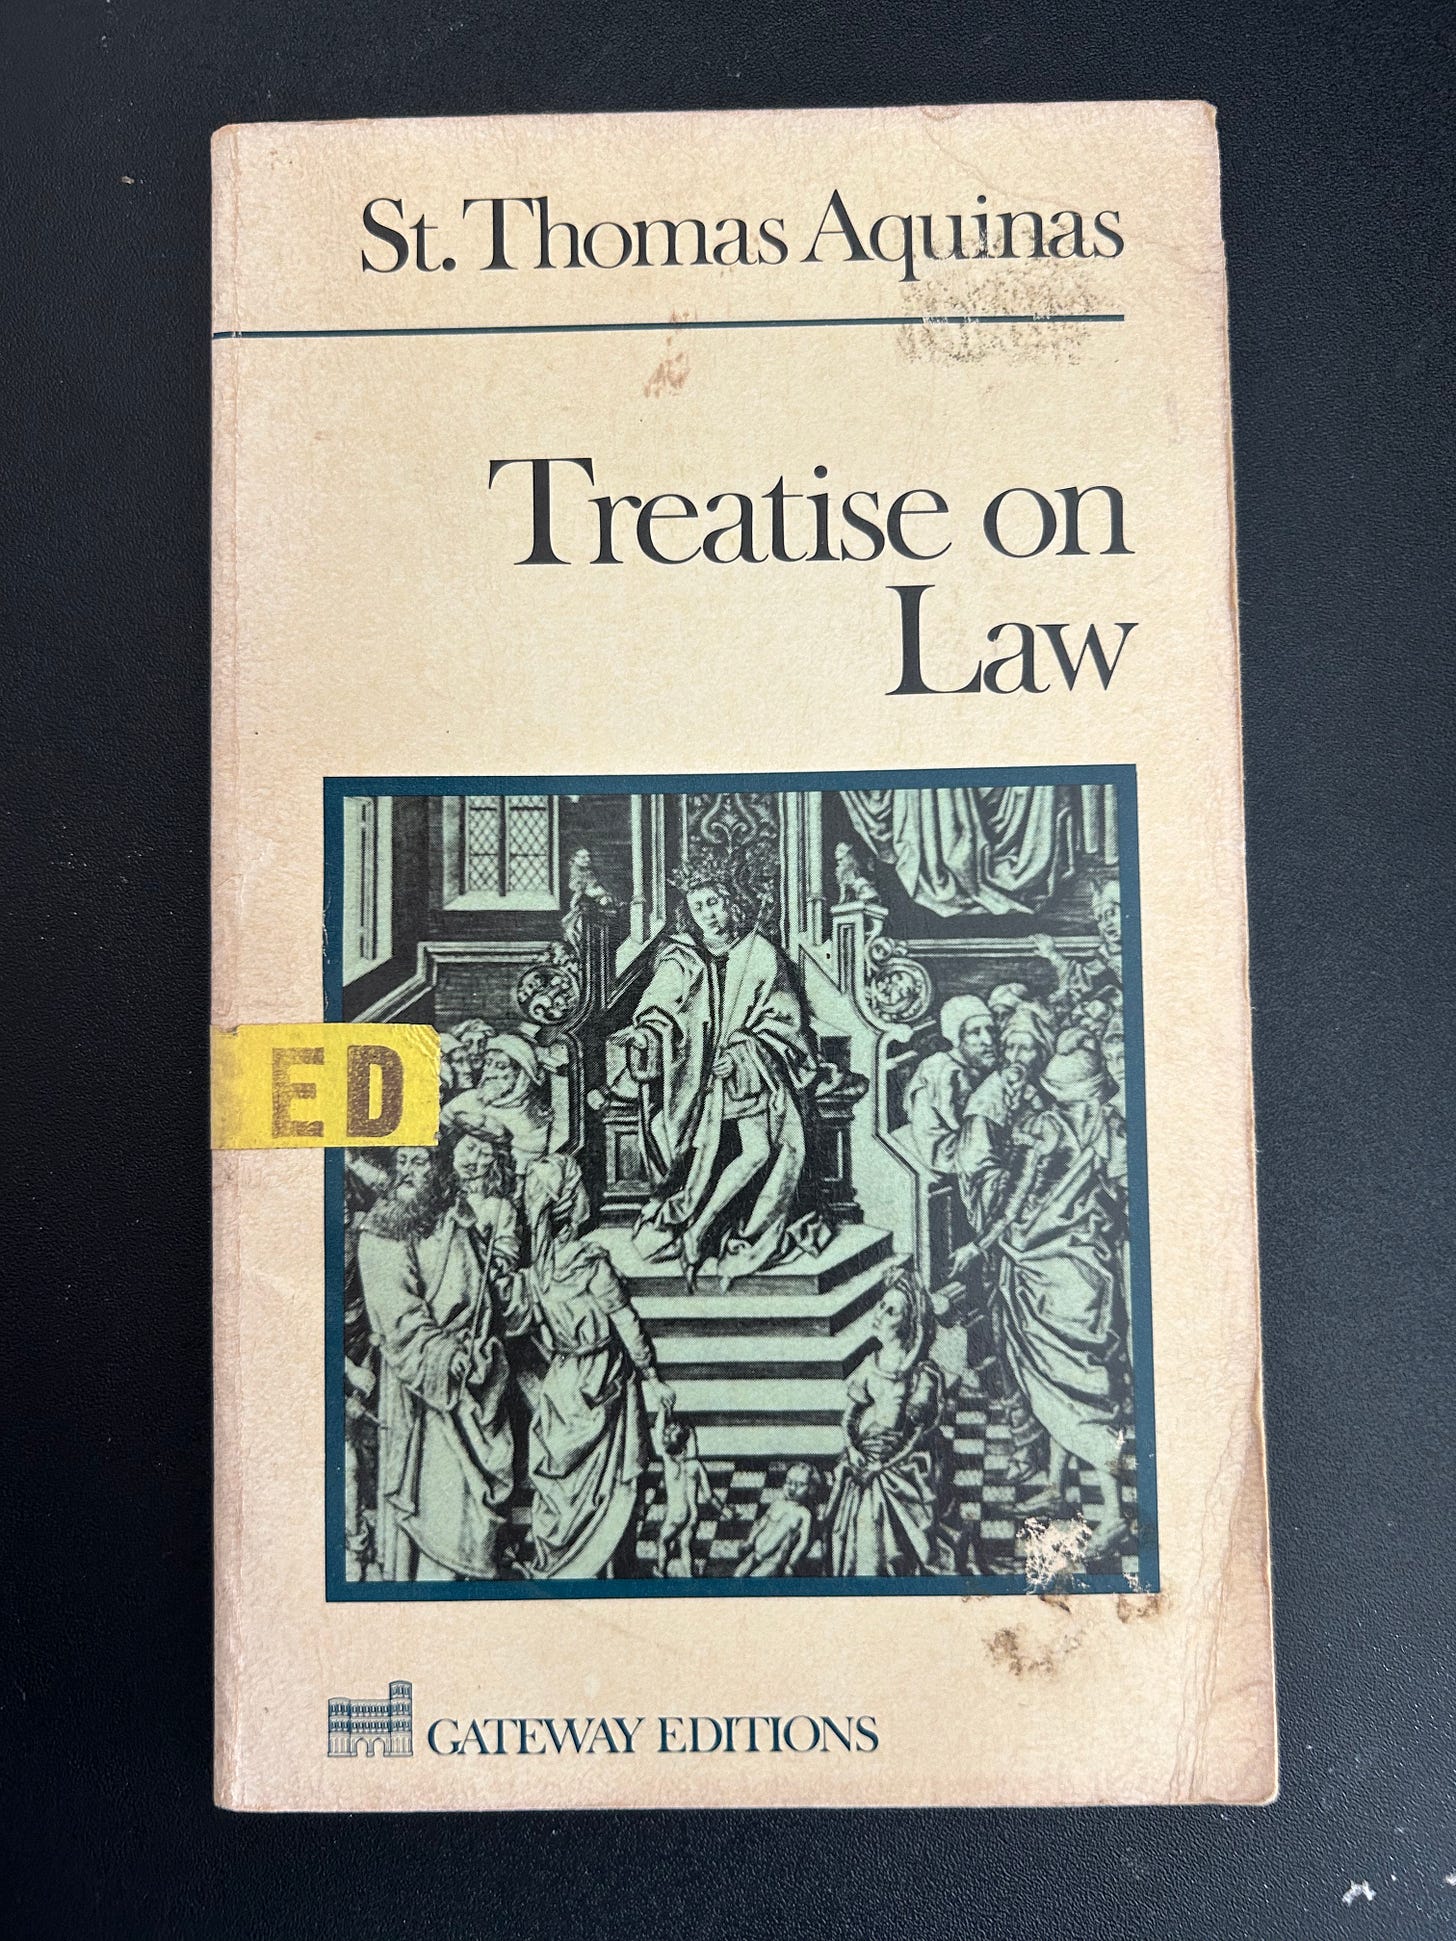 A battered copy of the Treatise on Law by St. Thomas Aquinas, with a yellow "Used" sticker visible on the front cover.